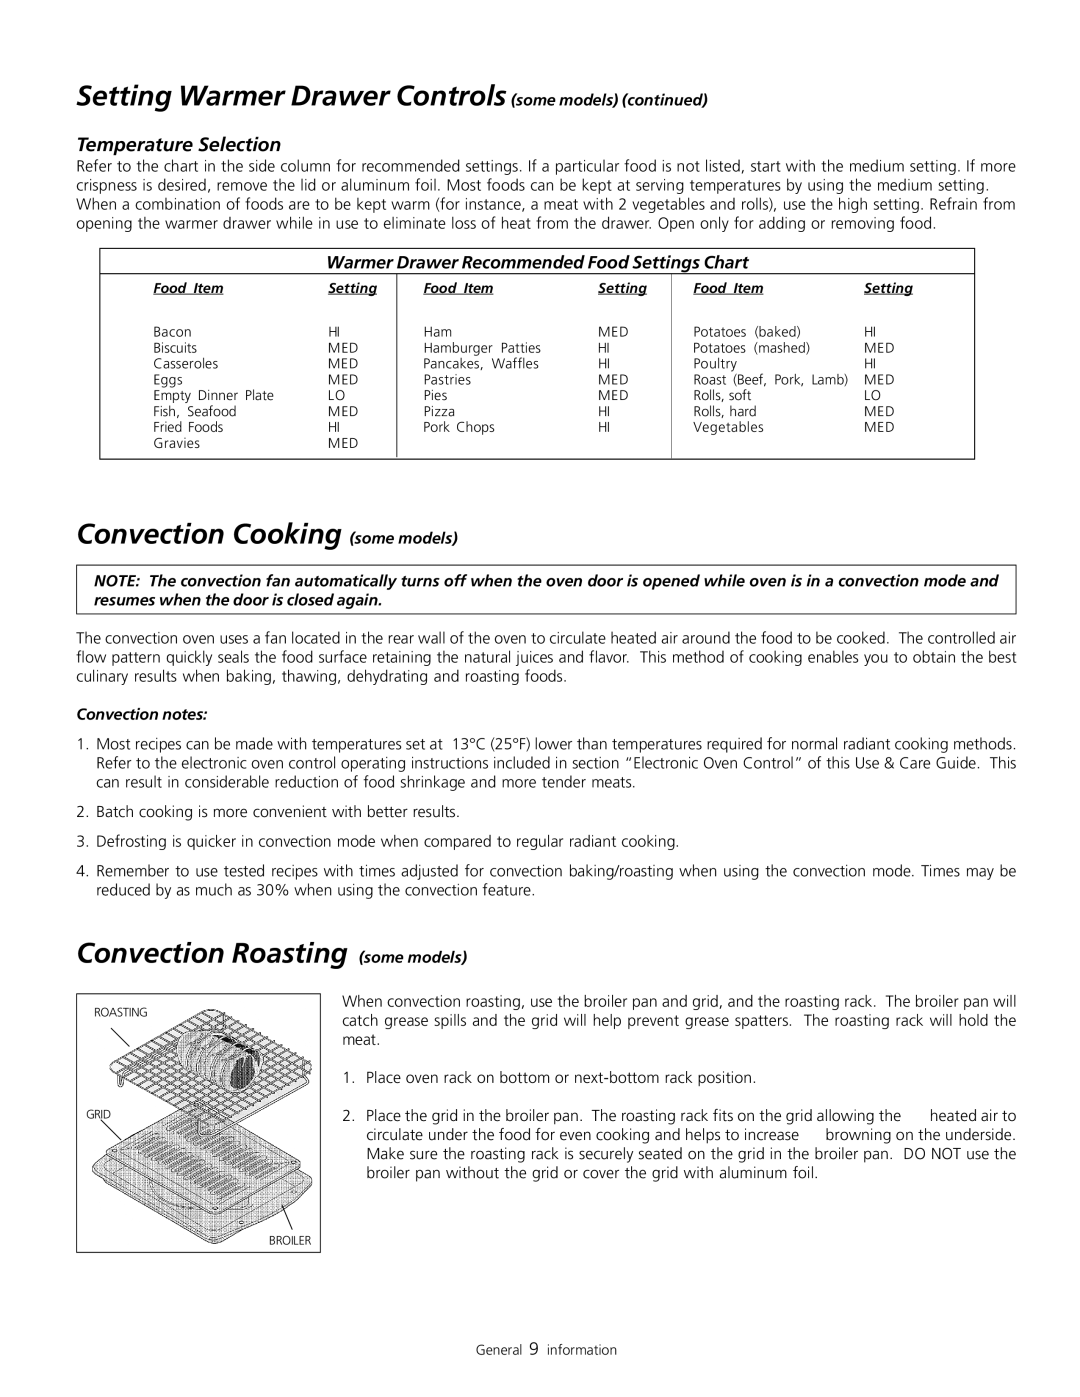 Frigidaire 318200805 warranty Setting Warmer Drawer Controls some models continued, Convection Cooking some models 